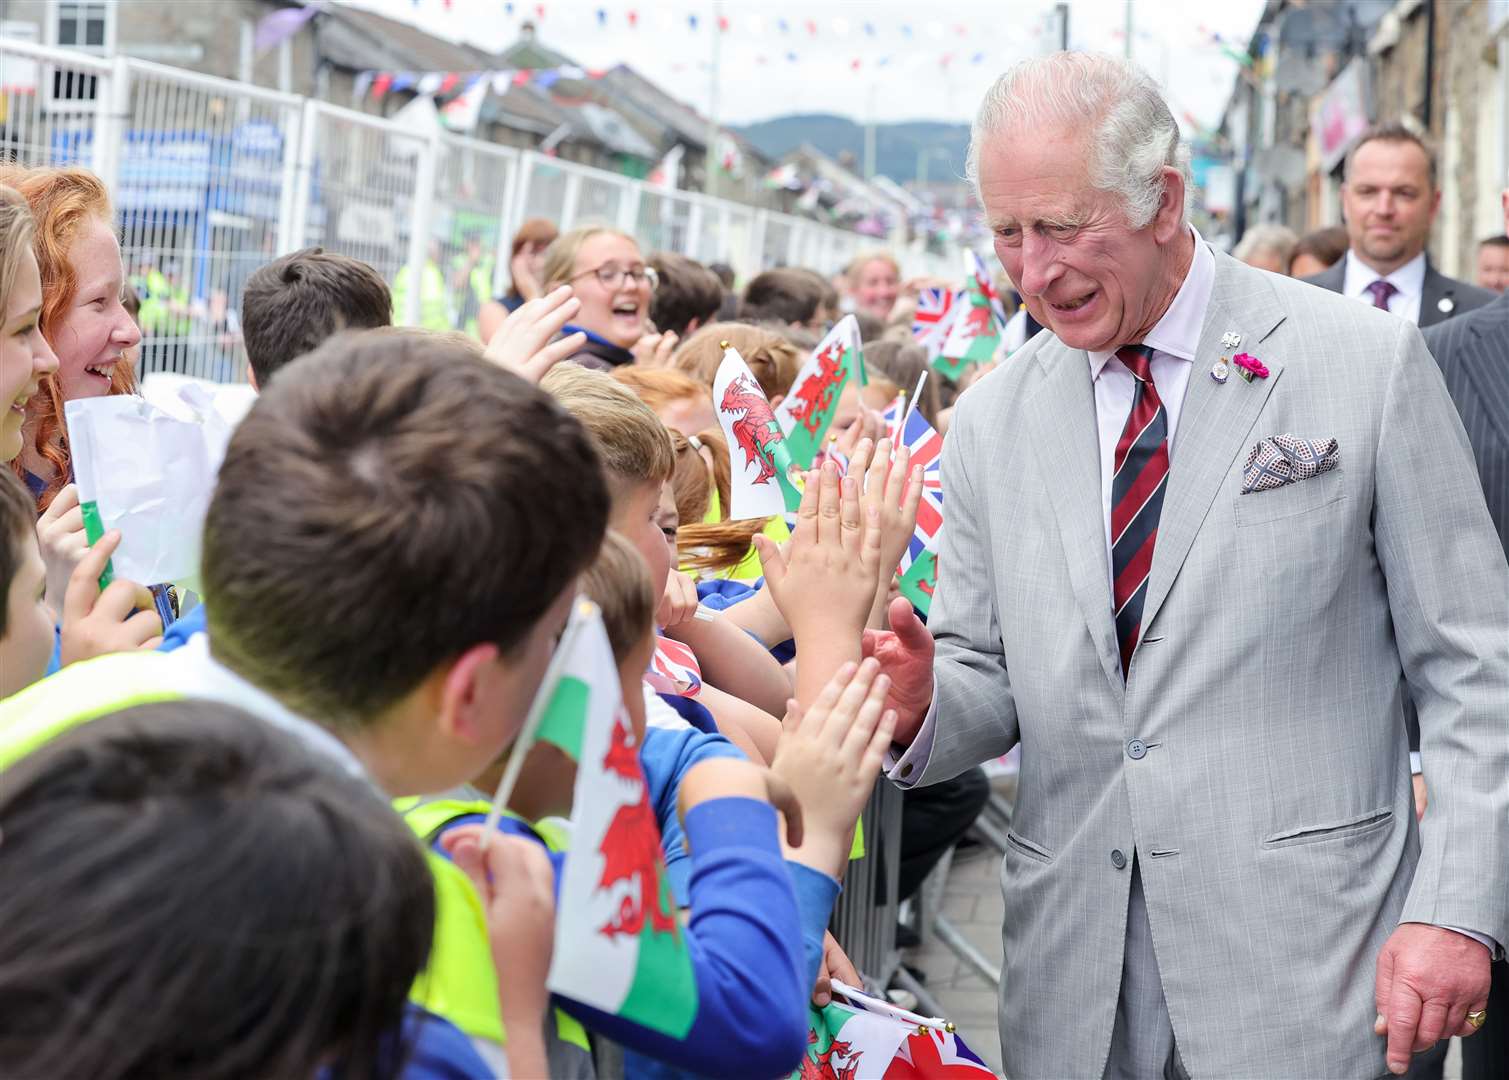 King Charles, then the Prince of Wales, during his visit to Treorchy earlier this year (Chris Jackson/PA)